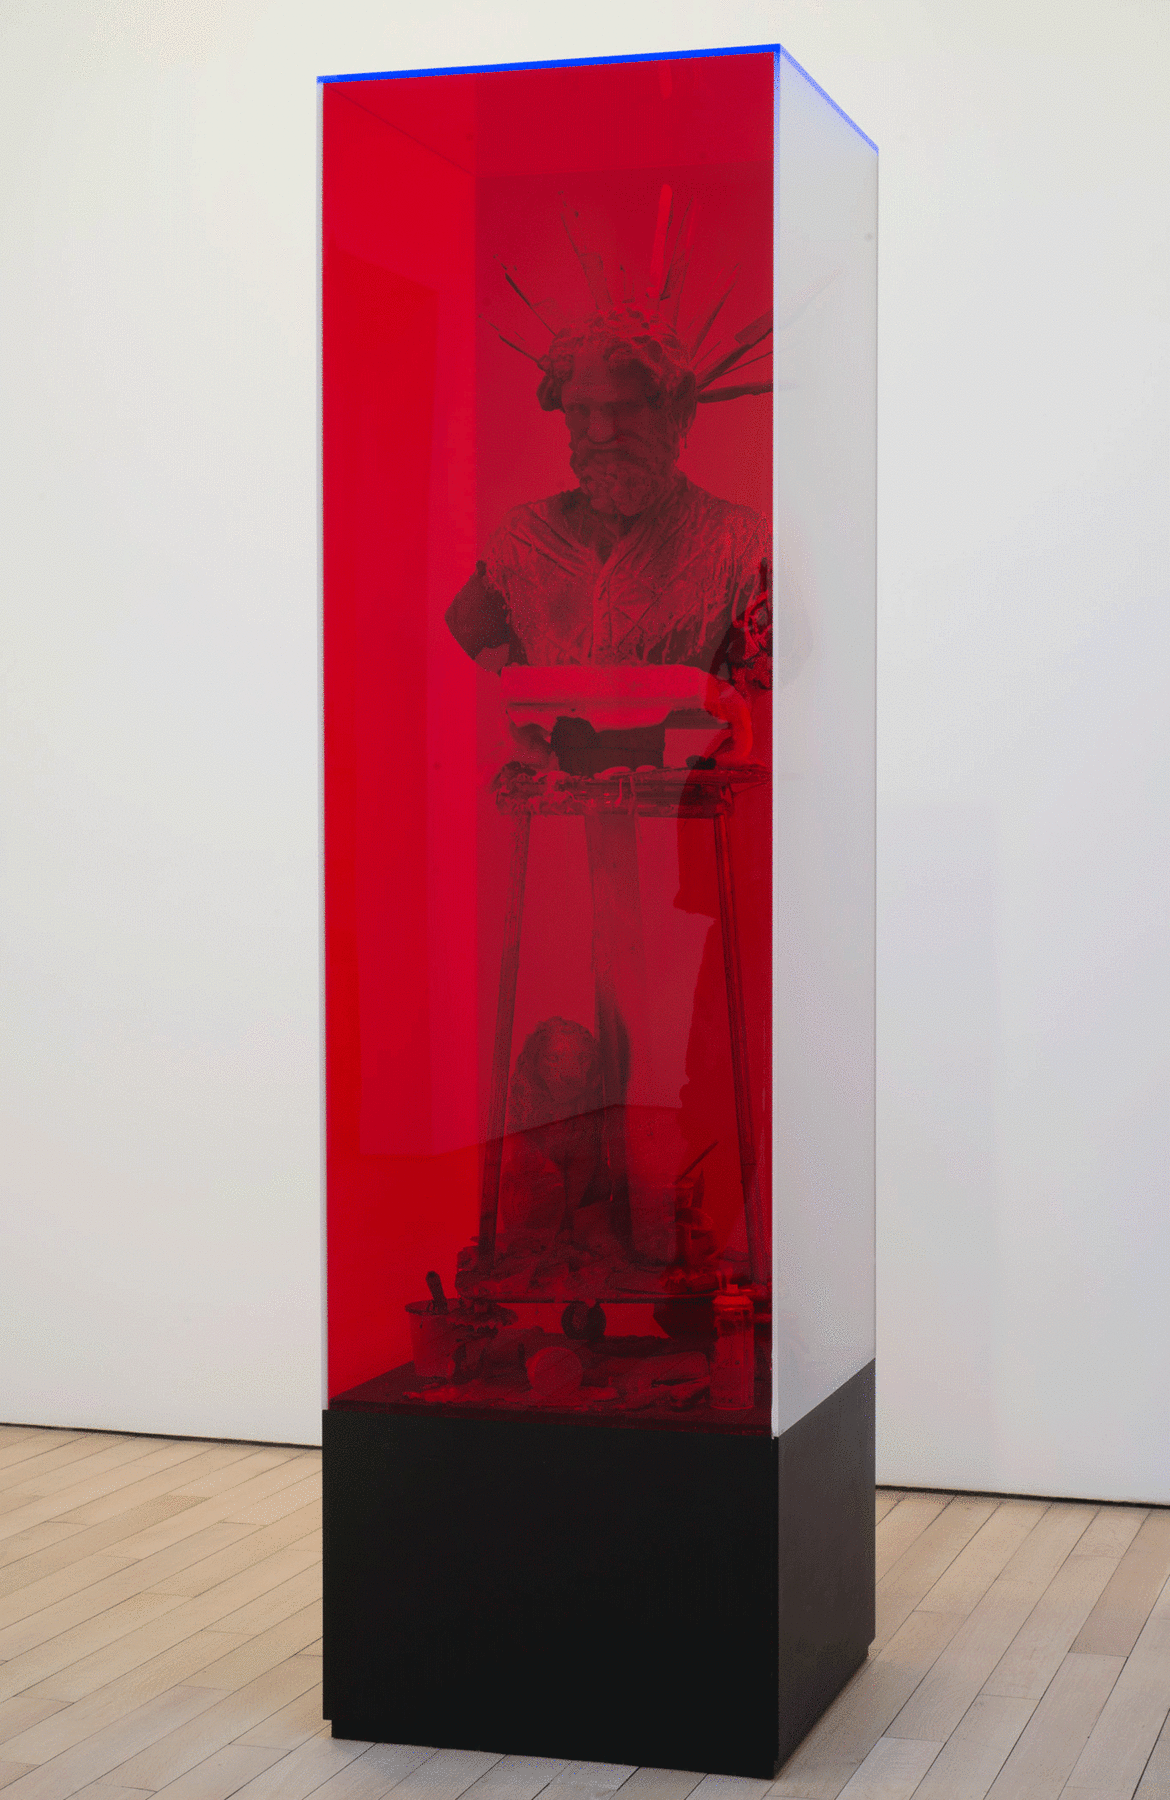 sculpture encased in red glass